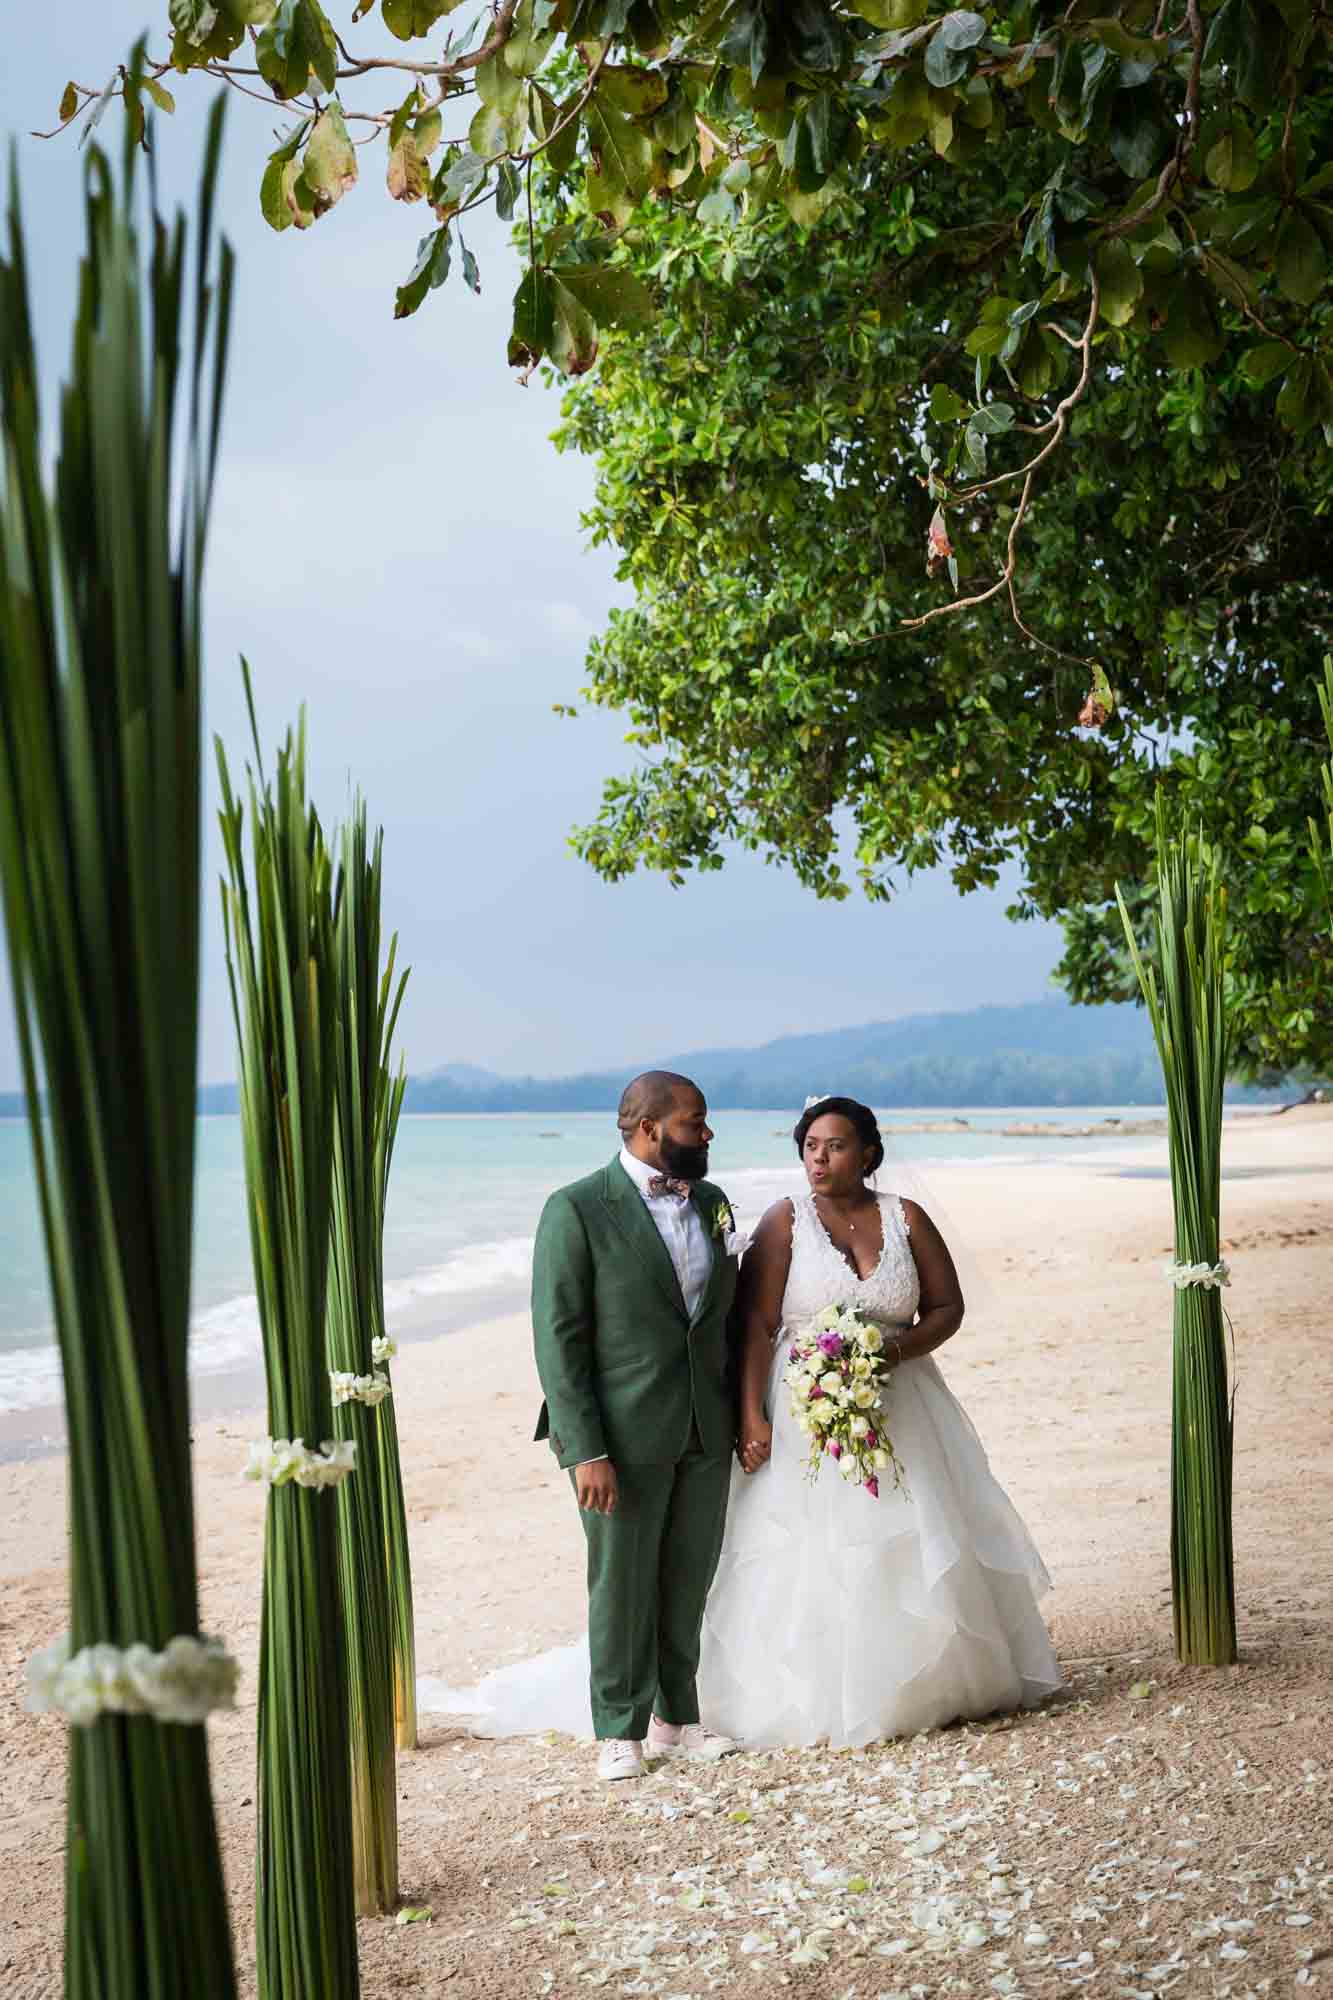 Bride and groom on a Thailand beach for an article on destination wedding planning tips